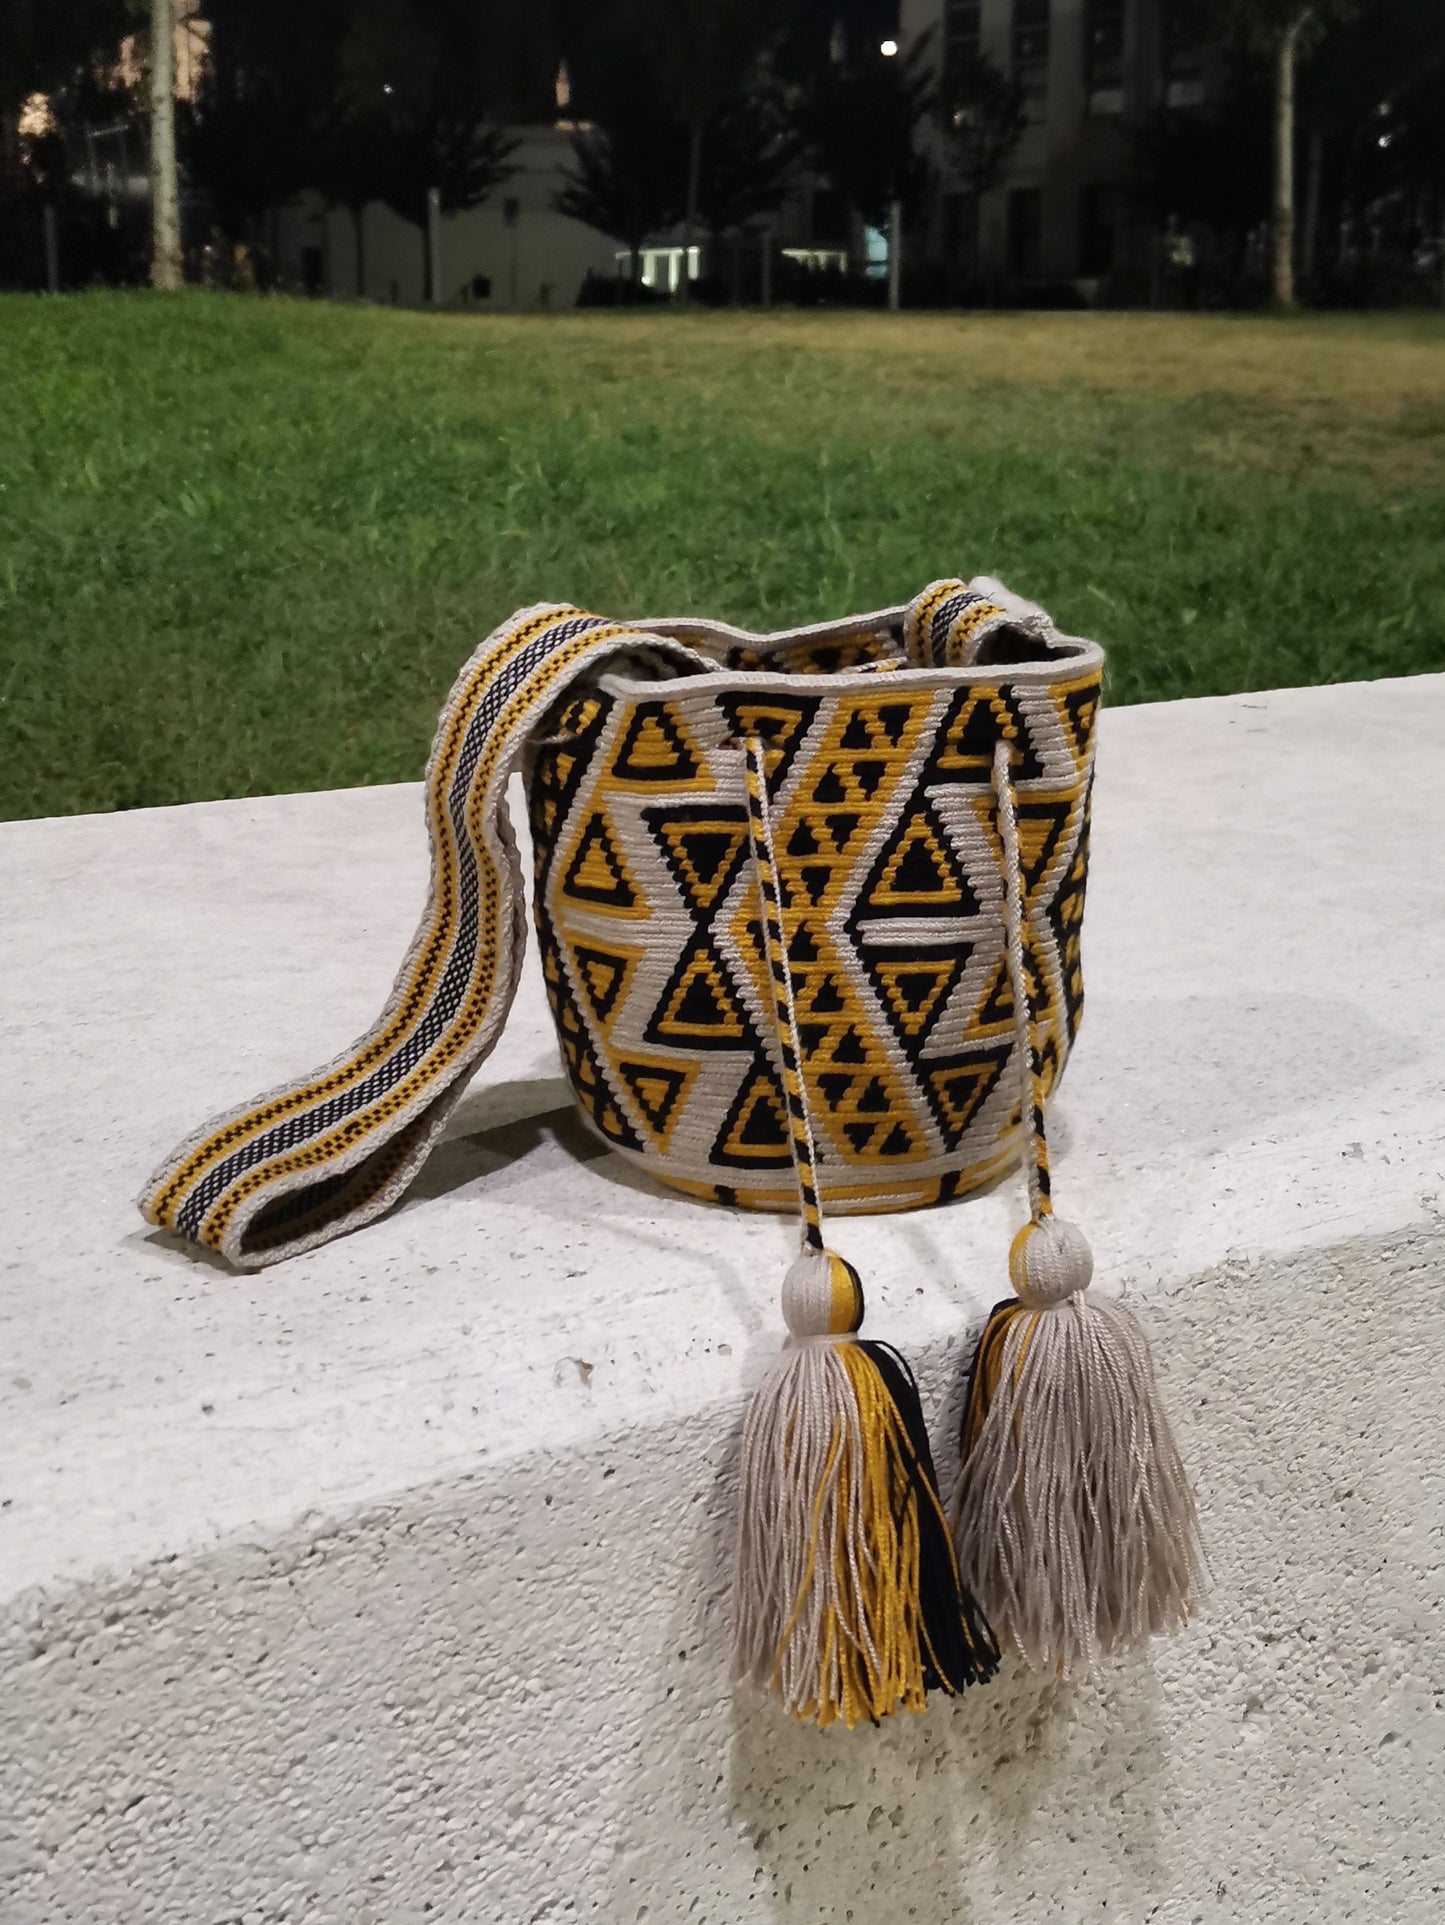 END OF SERIES - Beige and yellow S mochila shoulder bag